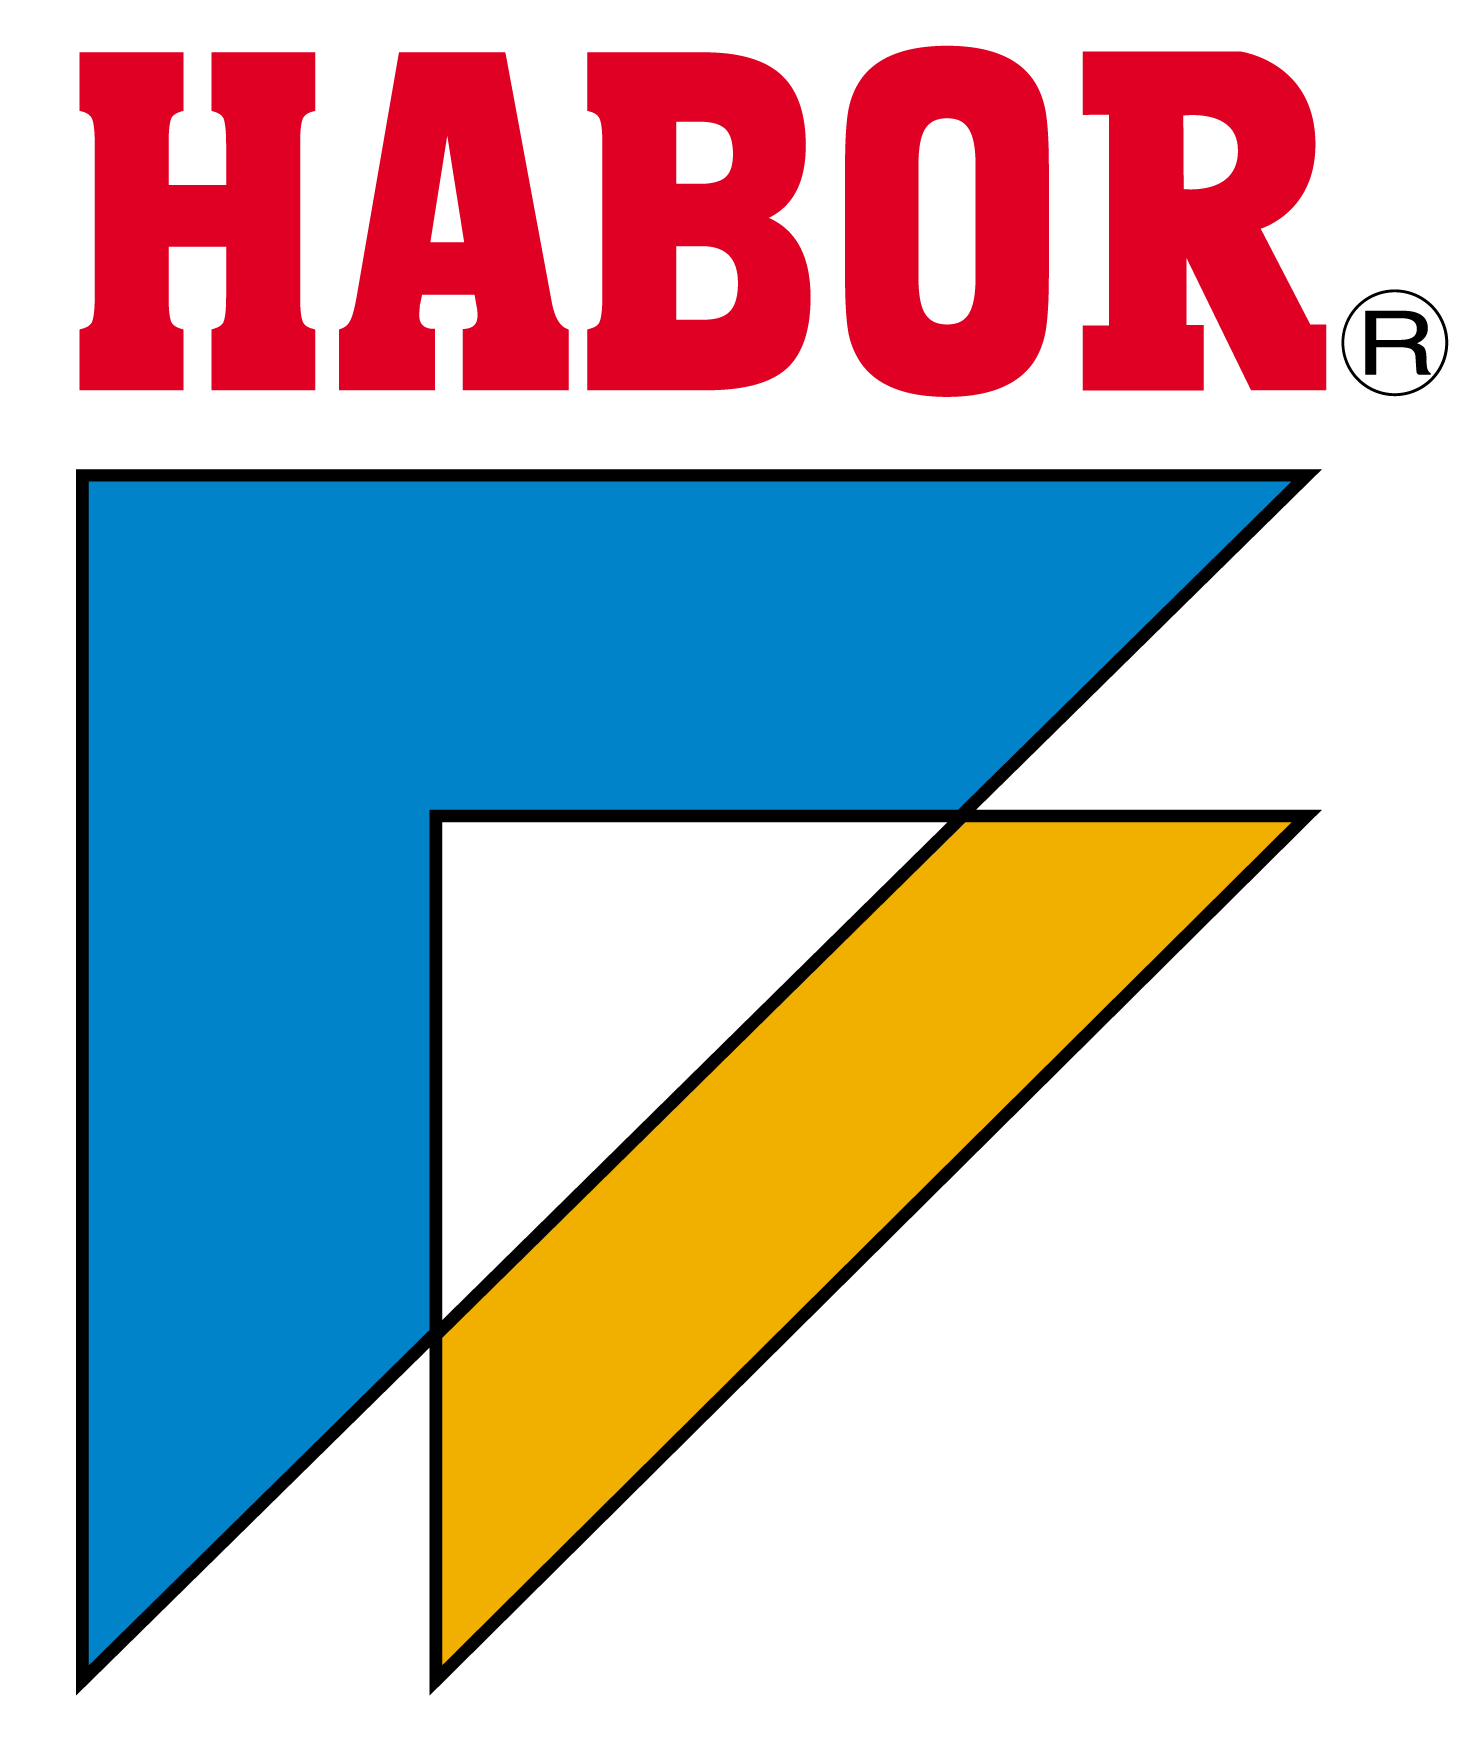 About|HABOR PRECISION INC.